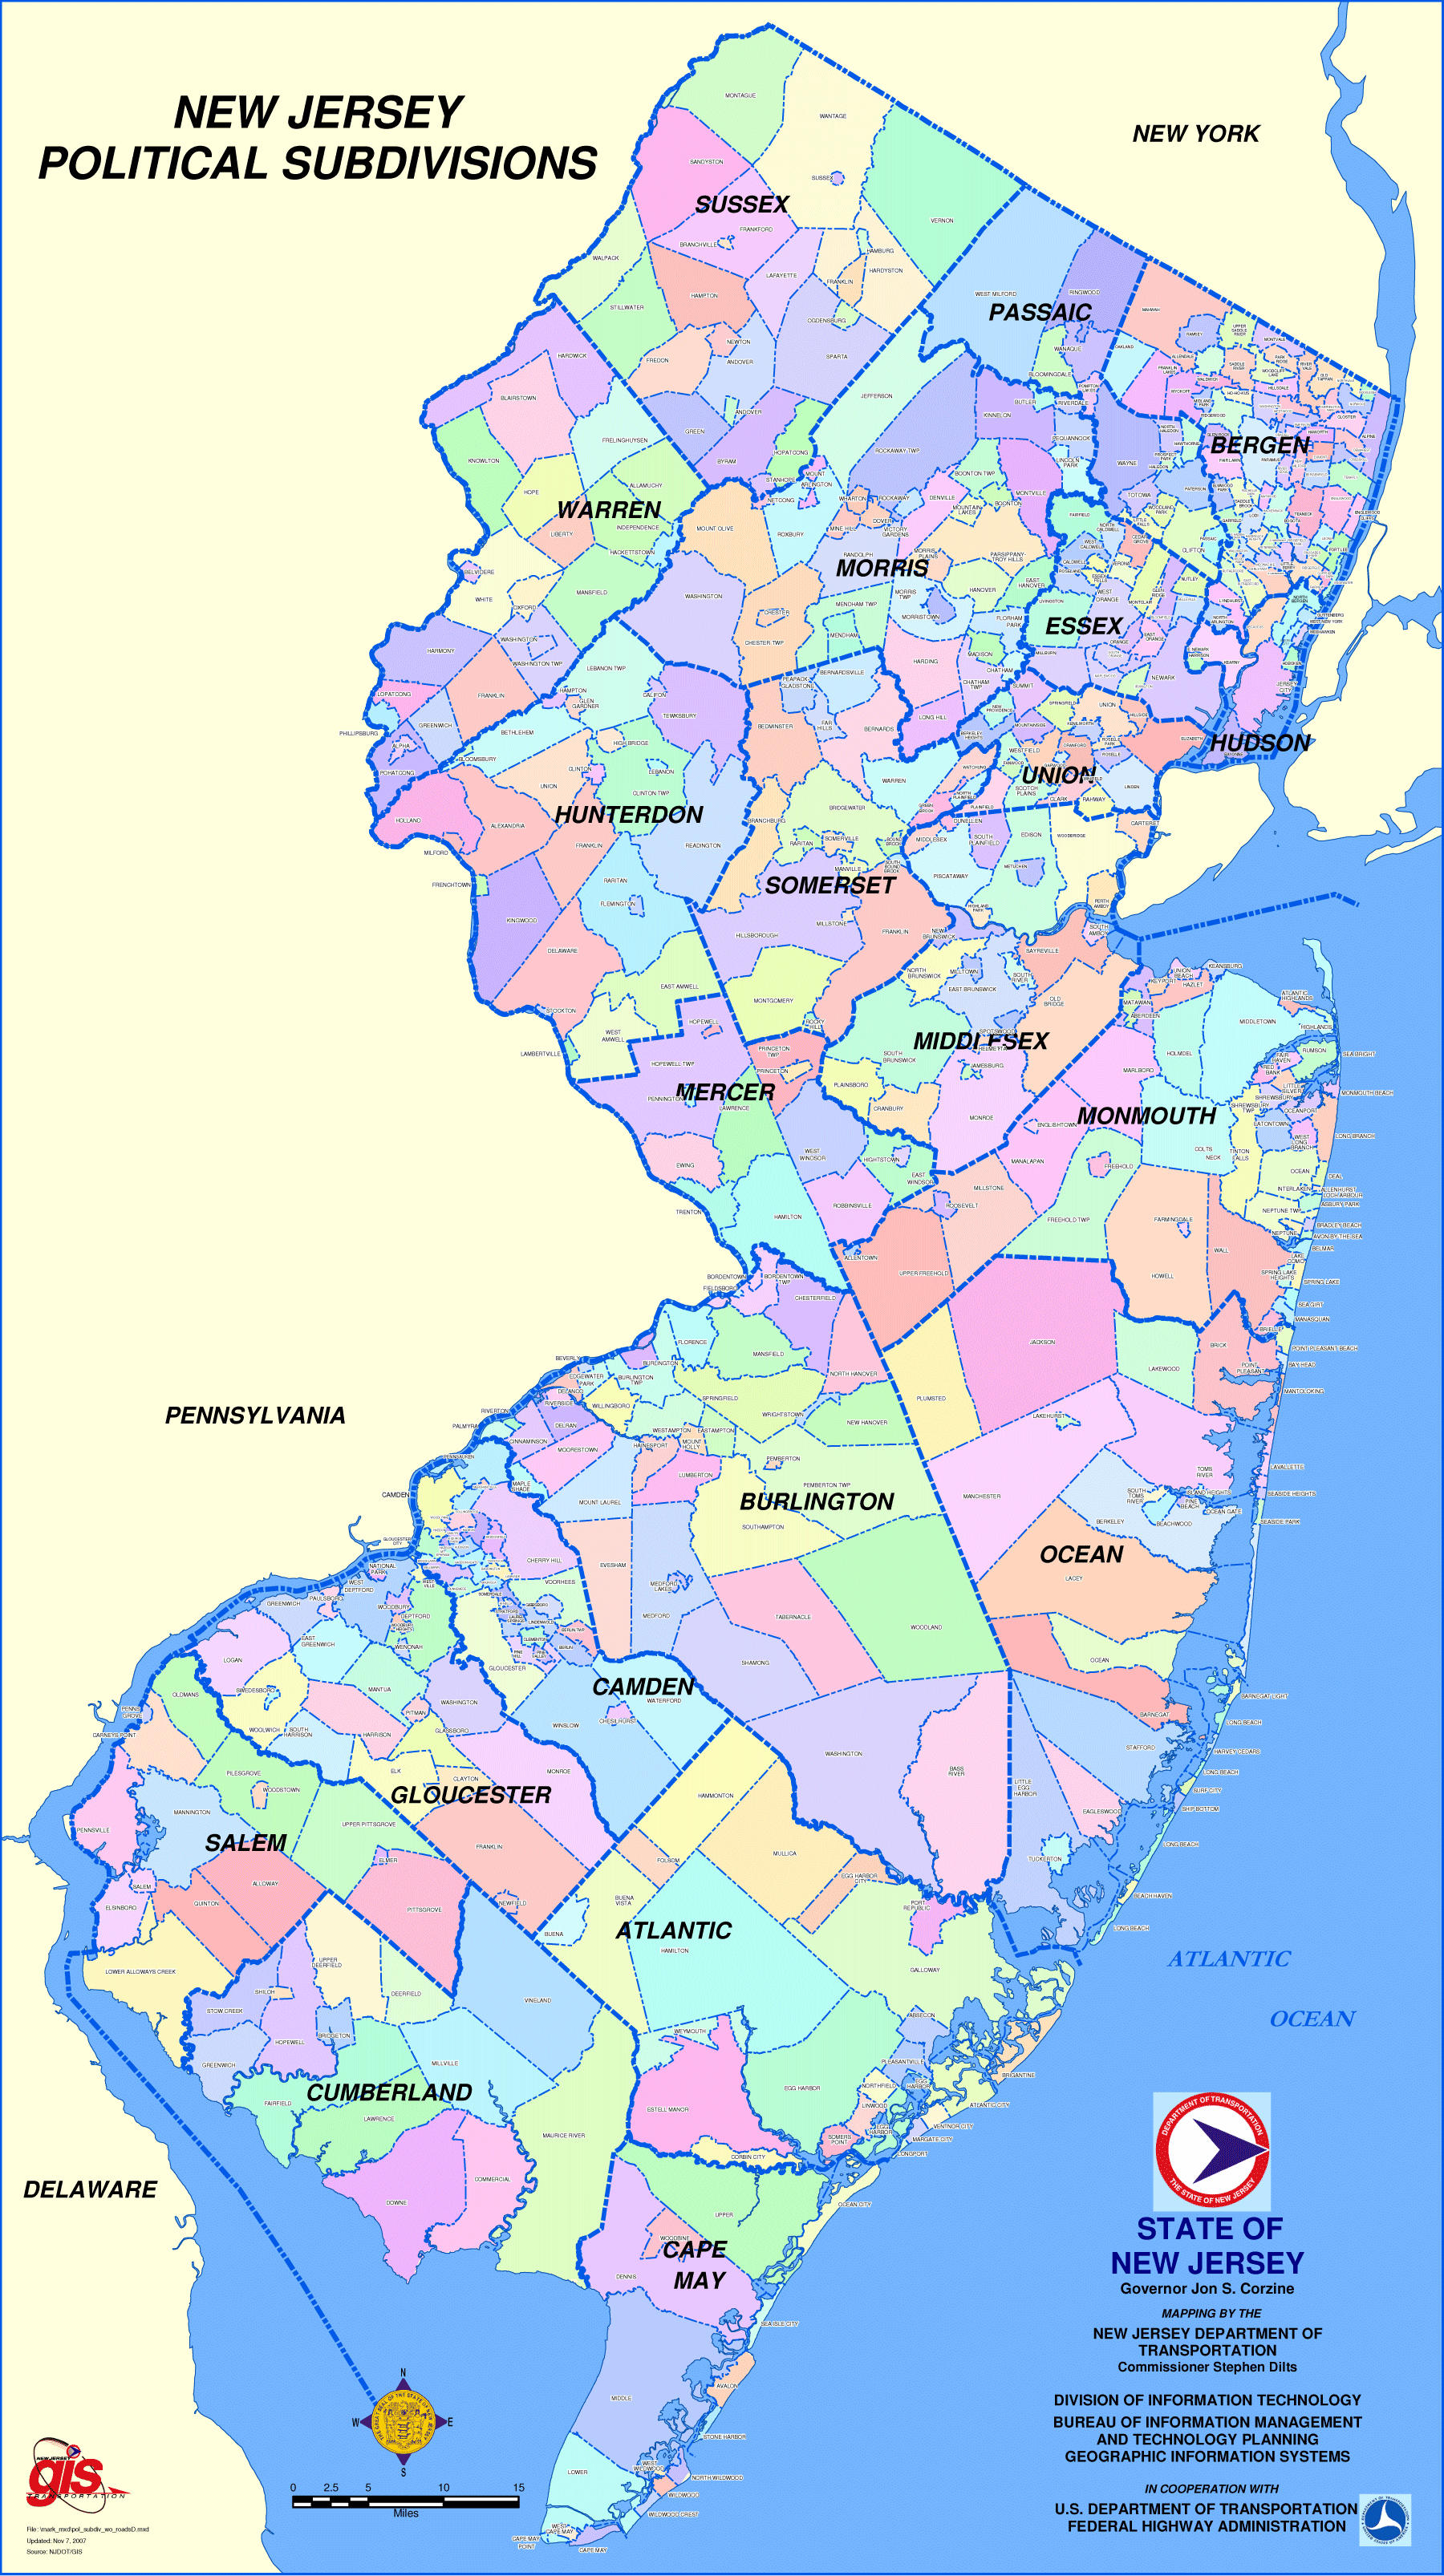 New Jersey Map | Fotolip.com Rich image and wallpaper